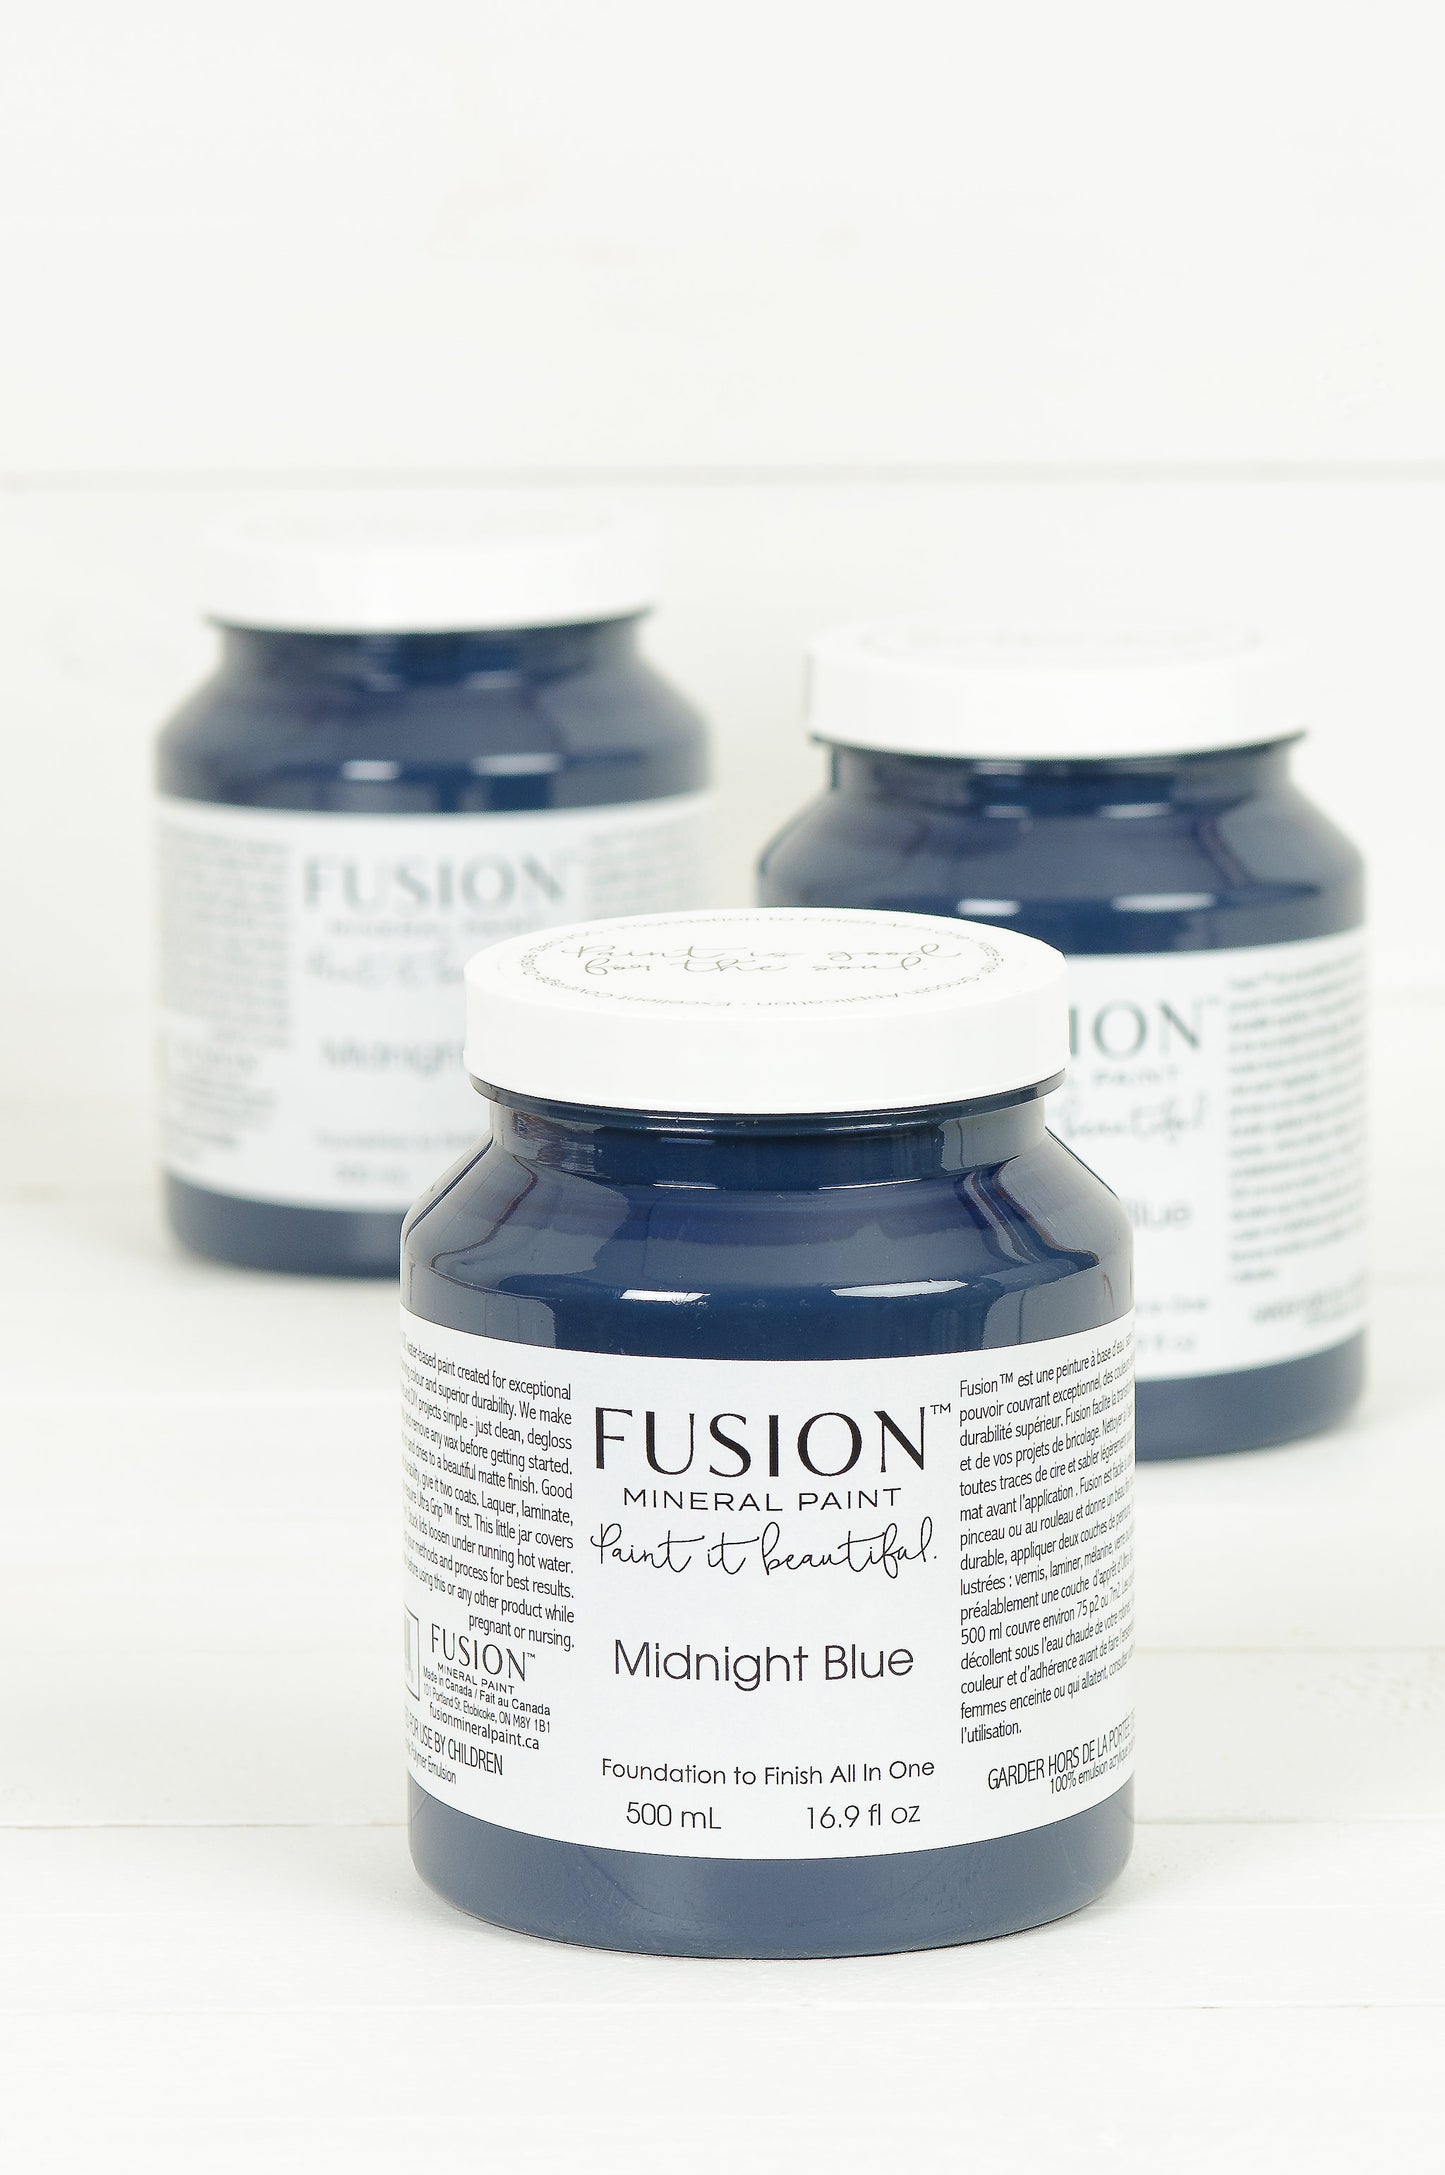 Midnight Blue by Fusion